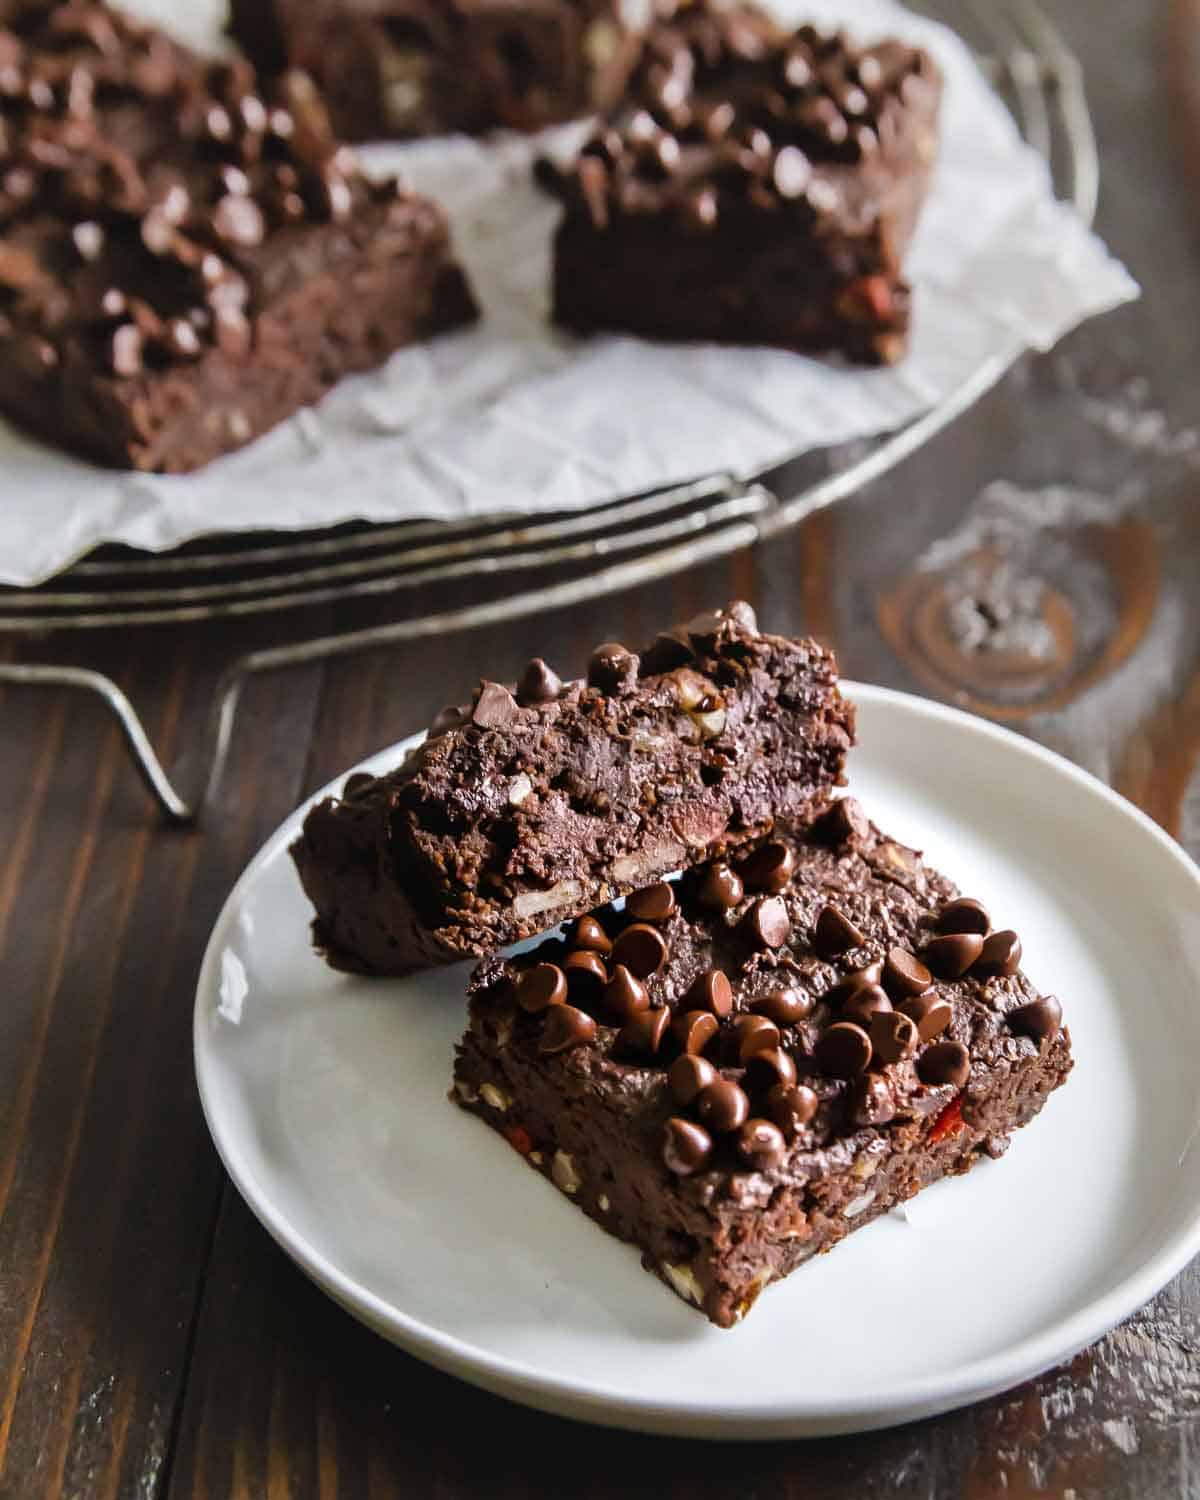 Intensely fudgy vegan brownies made with black beans require just 1 bowl and 20 minutes to bake for the ultimate healthy chocolate dessert.